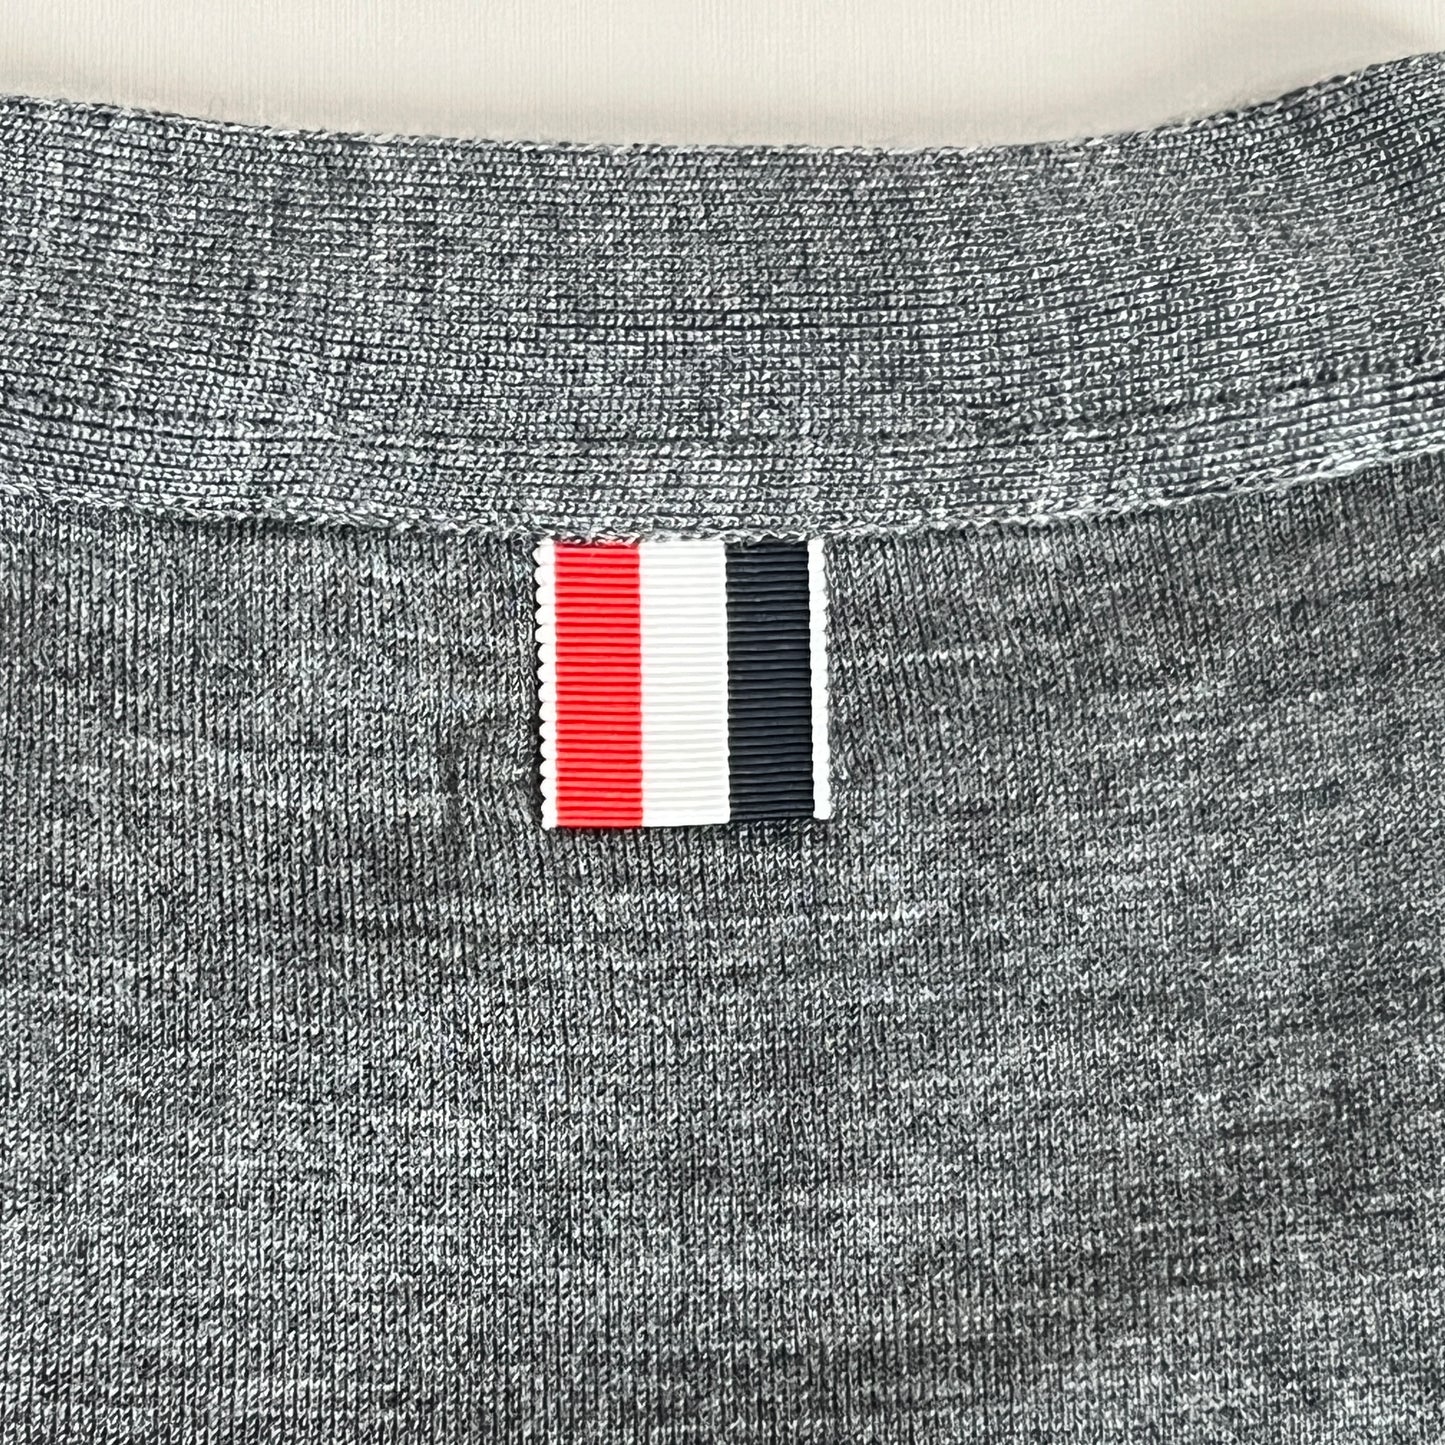 THOM BROWNE Cardigan w/ 4Bar in Sustainable Fine Merino Wool Med Grey Size 3 (New)